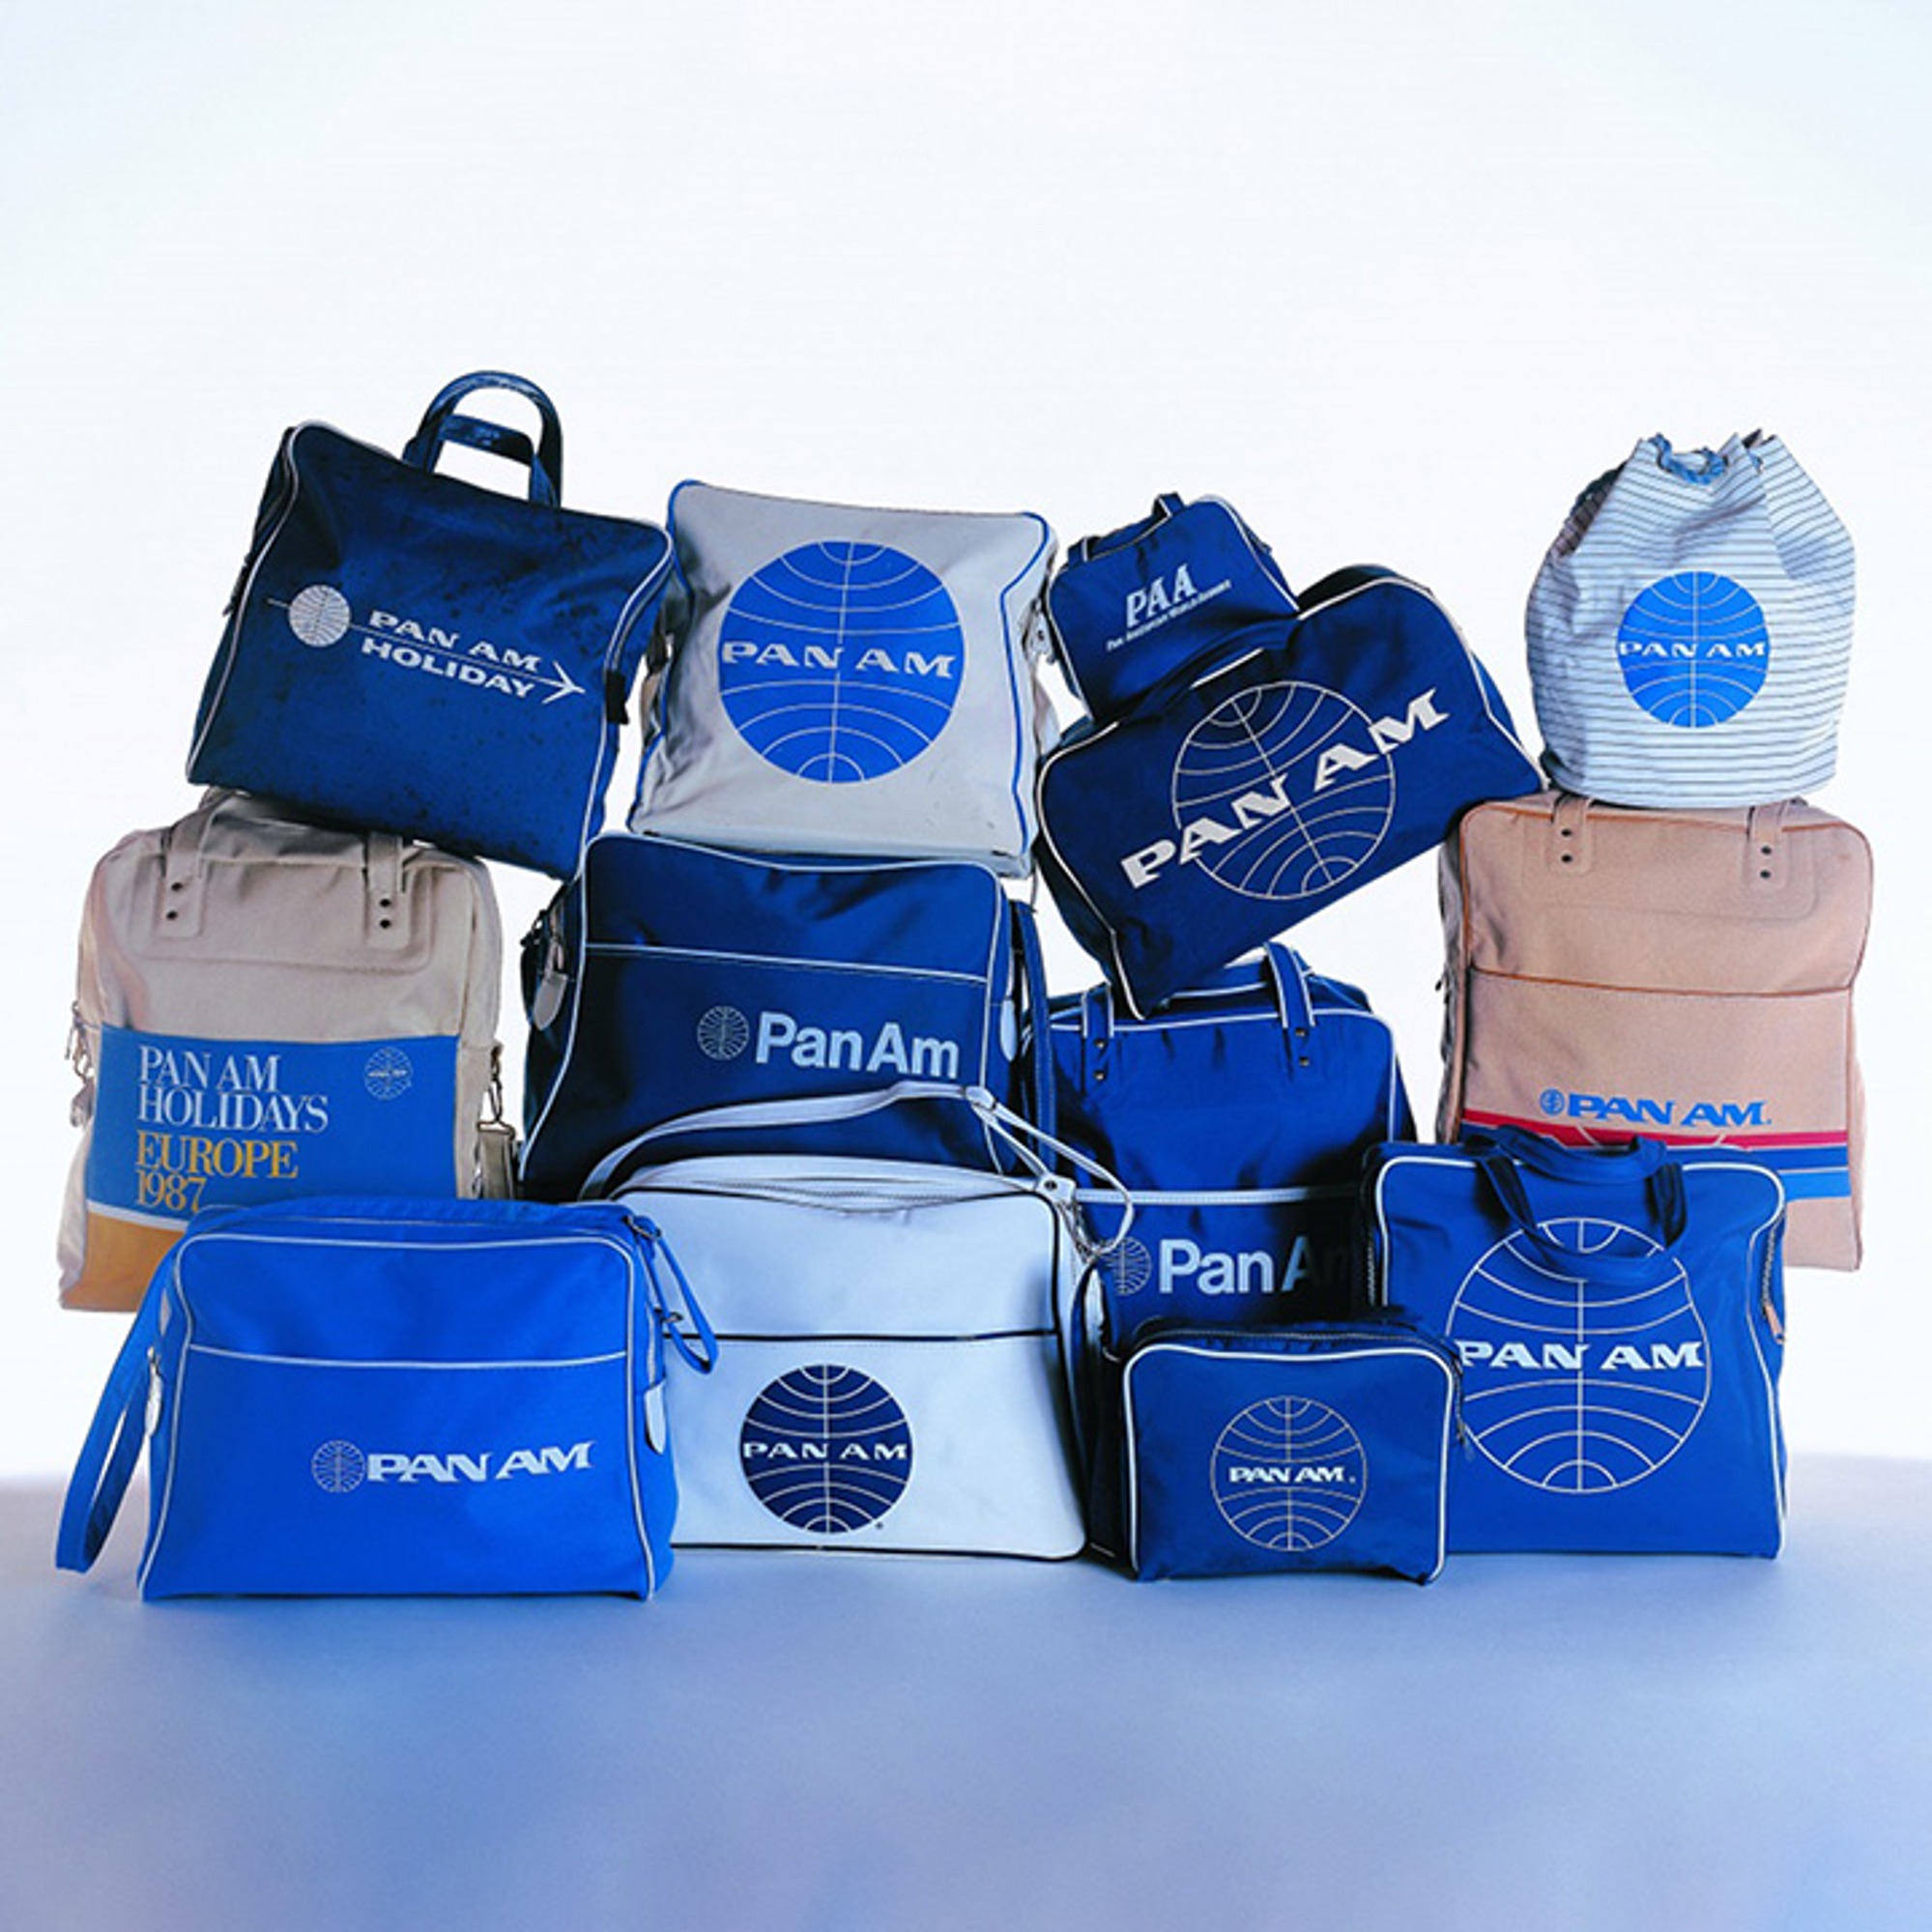 REPLICA BAG COLLECTIONS